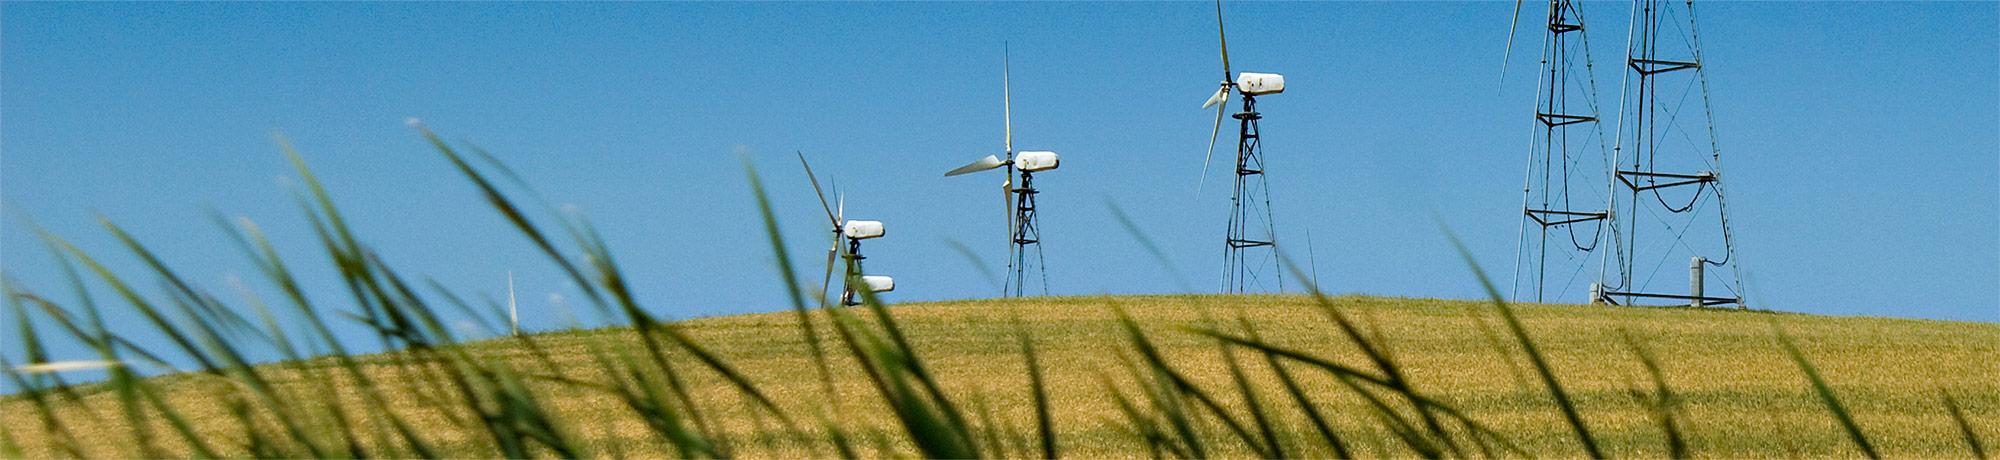 Green hill and blue sky with wind turbines in the distance and grass blades in the foreground